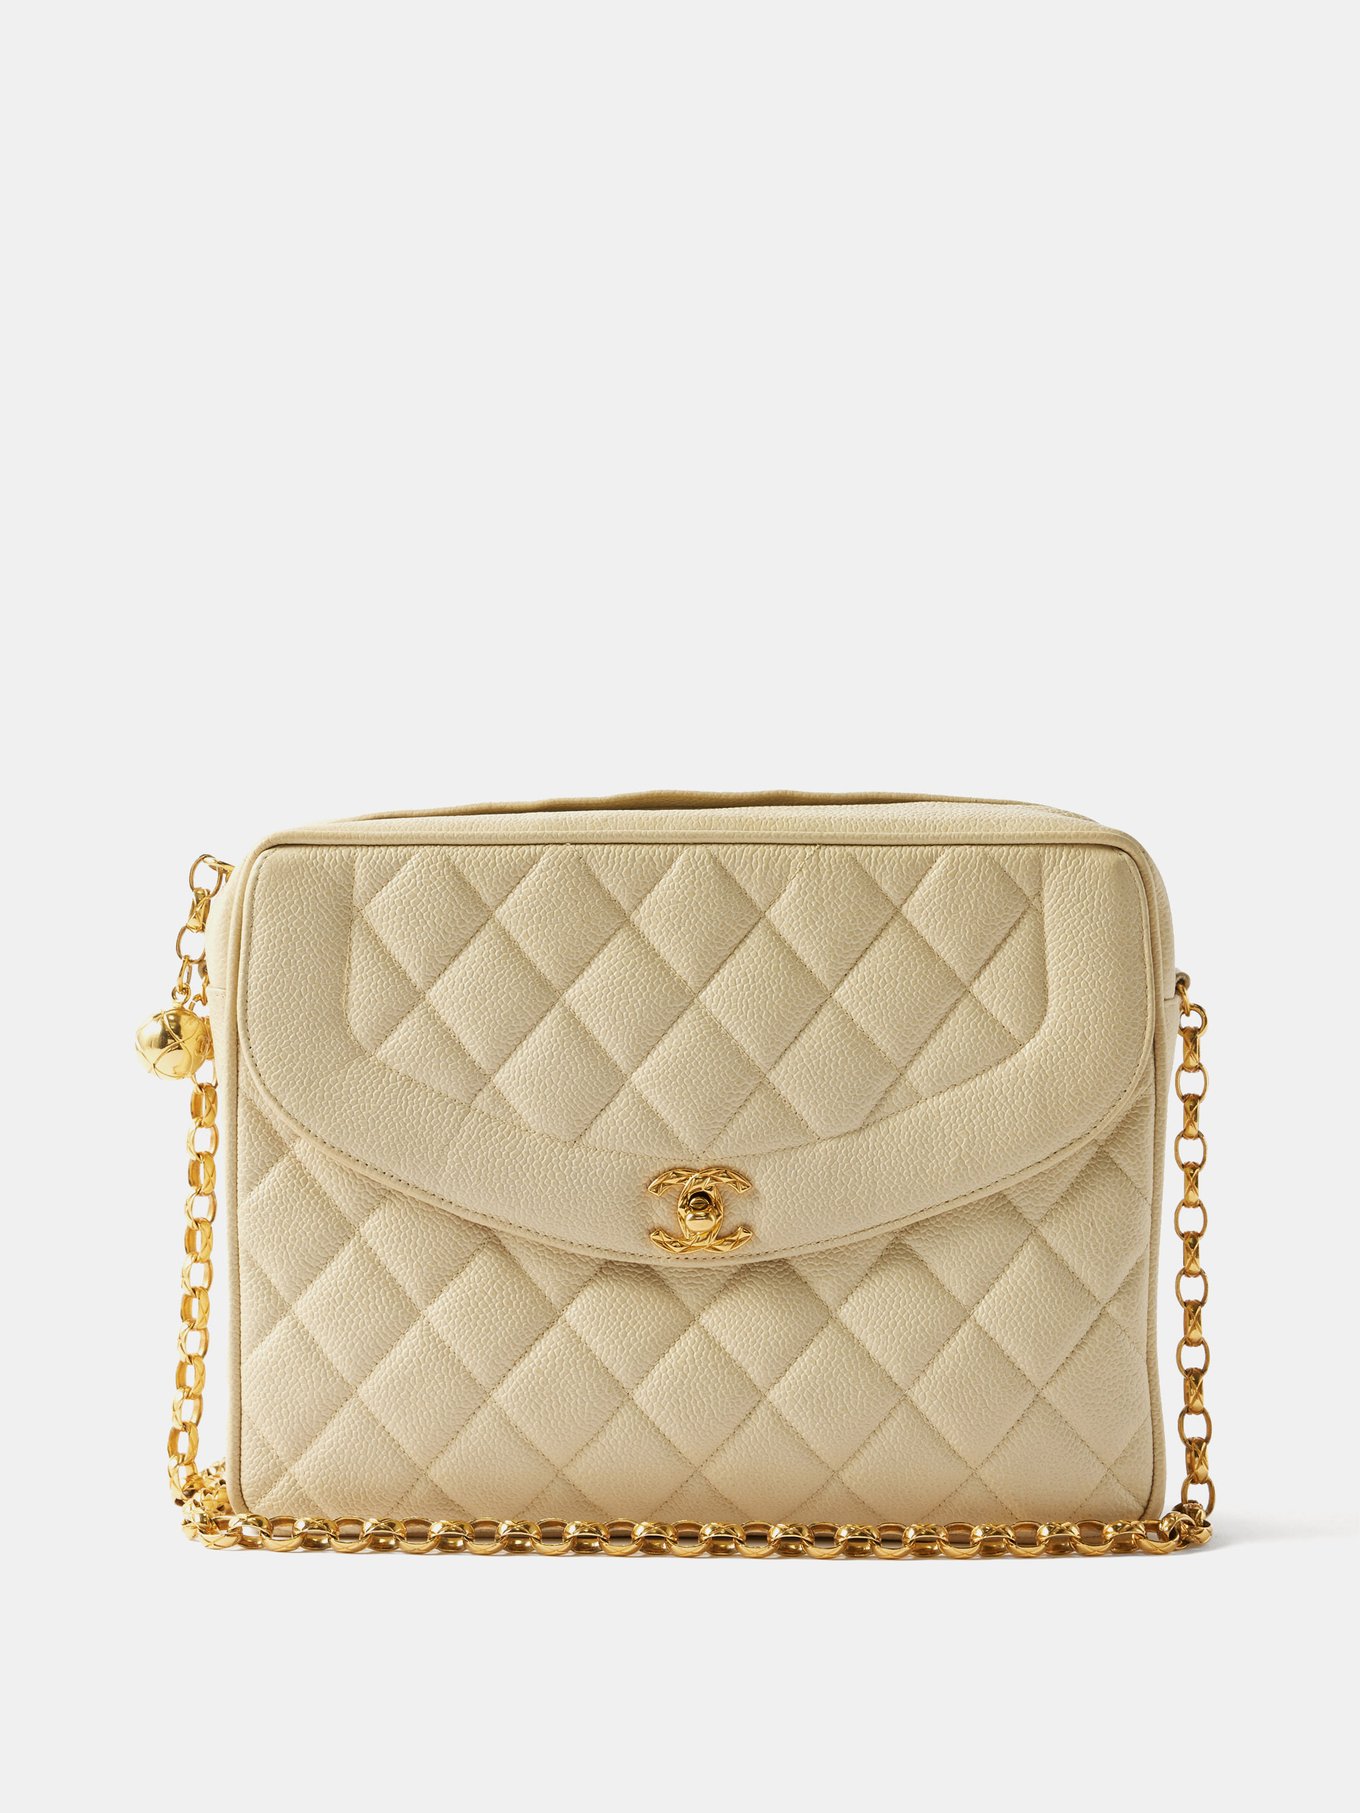 Chanel 1990s Cream Quilted Leather Crossbody Bag